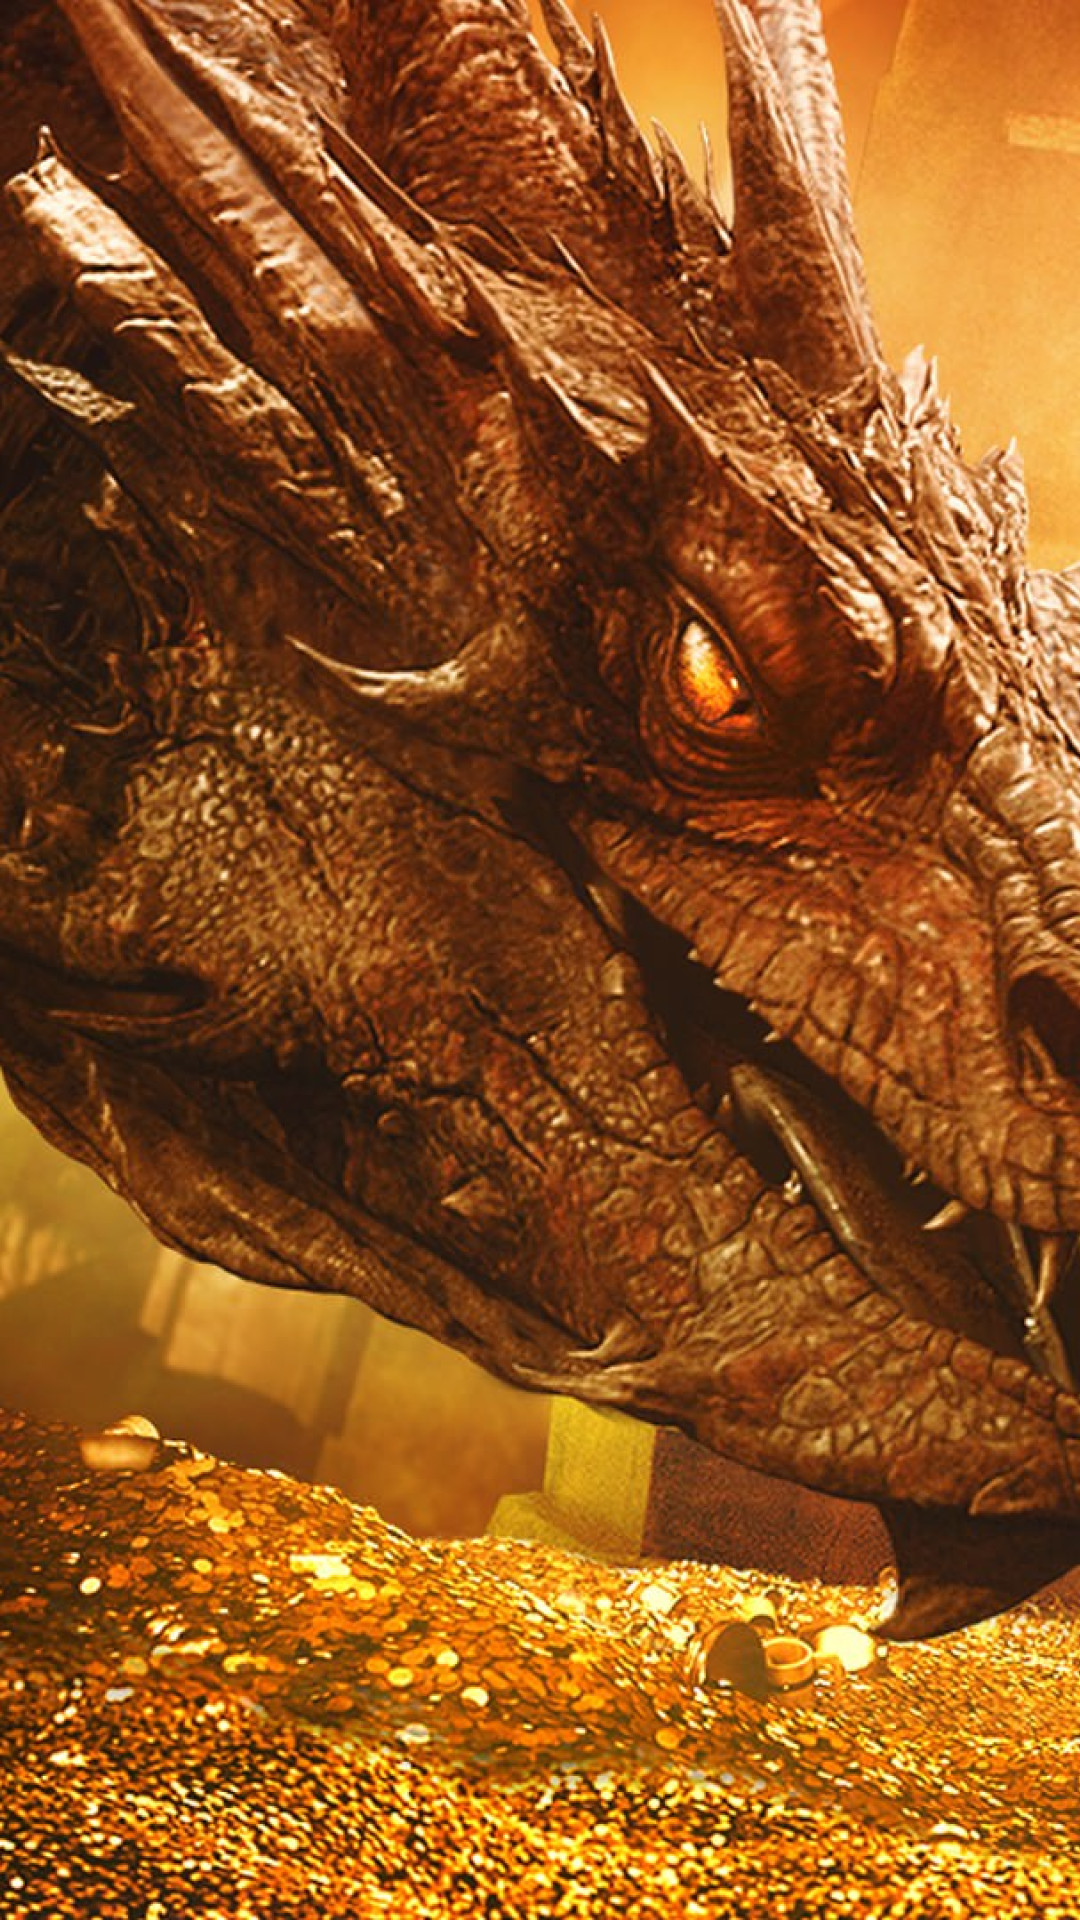 Smaug Iphone Wallpaper Dragin In The Hobbit The Desolation - Smaug Hd - HD Wallpaper 